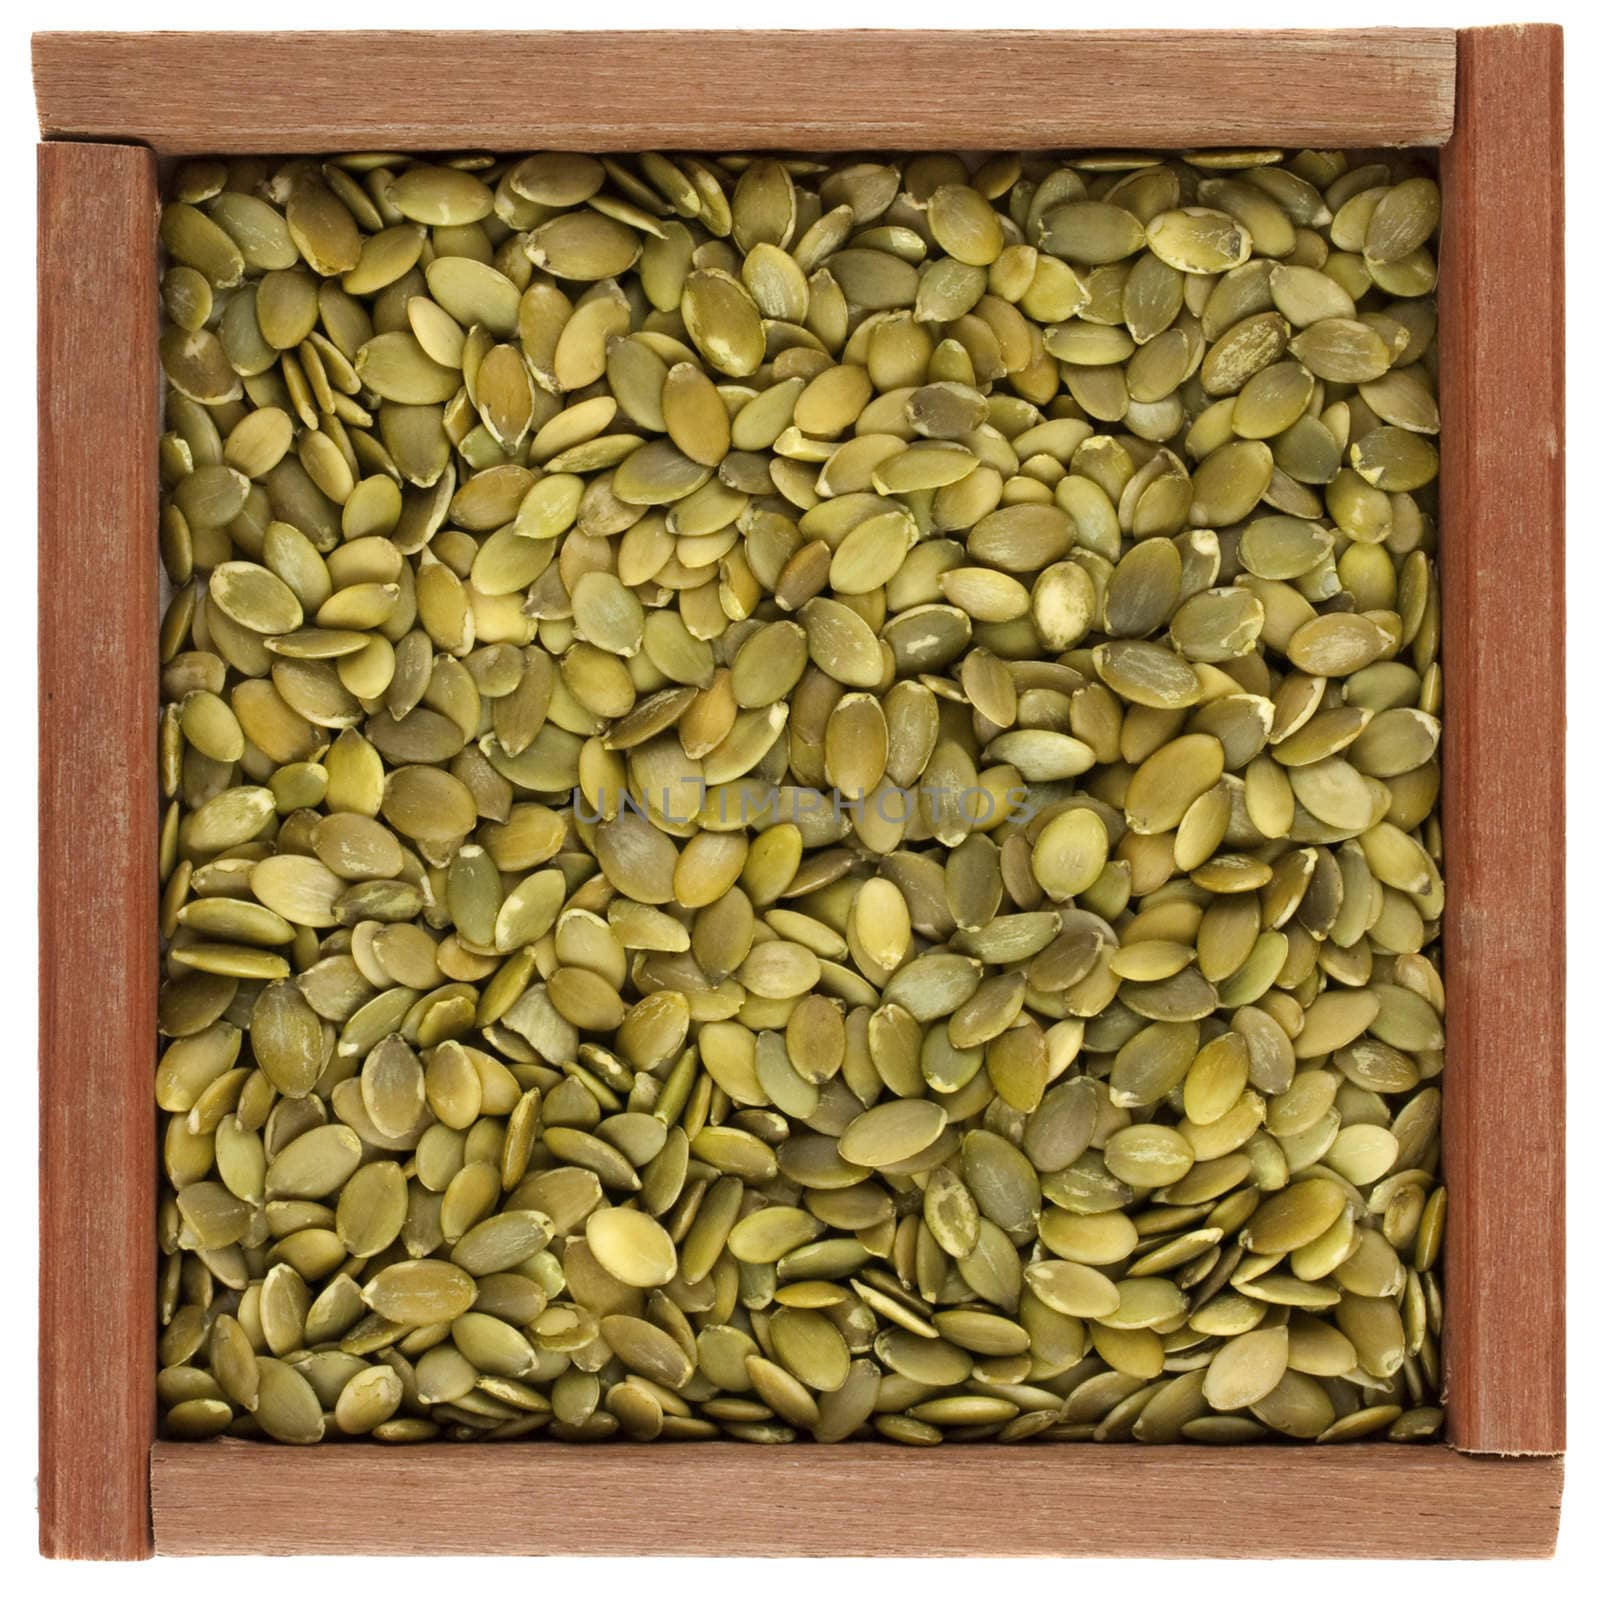 pepitas (pumpkin seeds) in a wooden box or frame isolated on white background